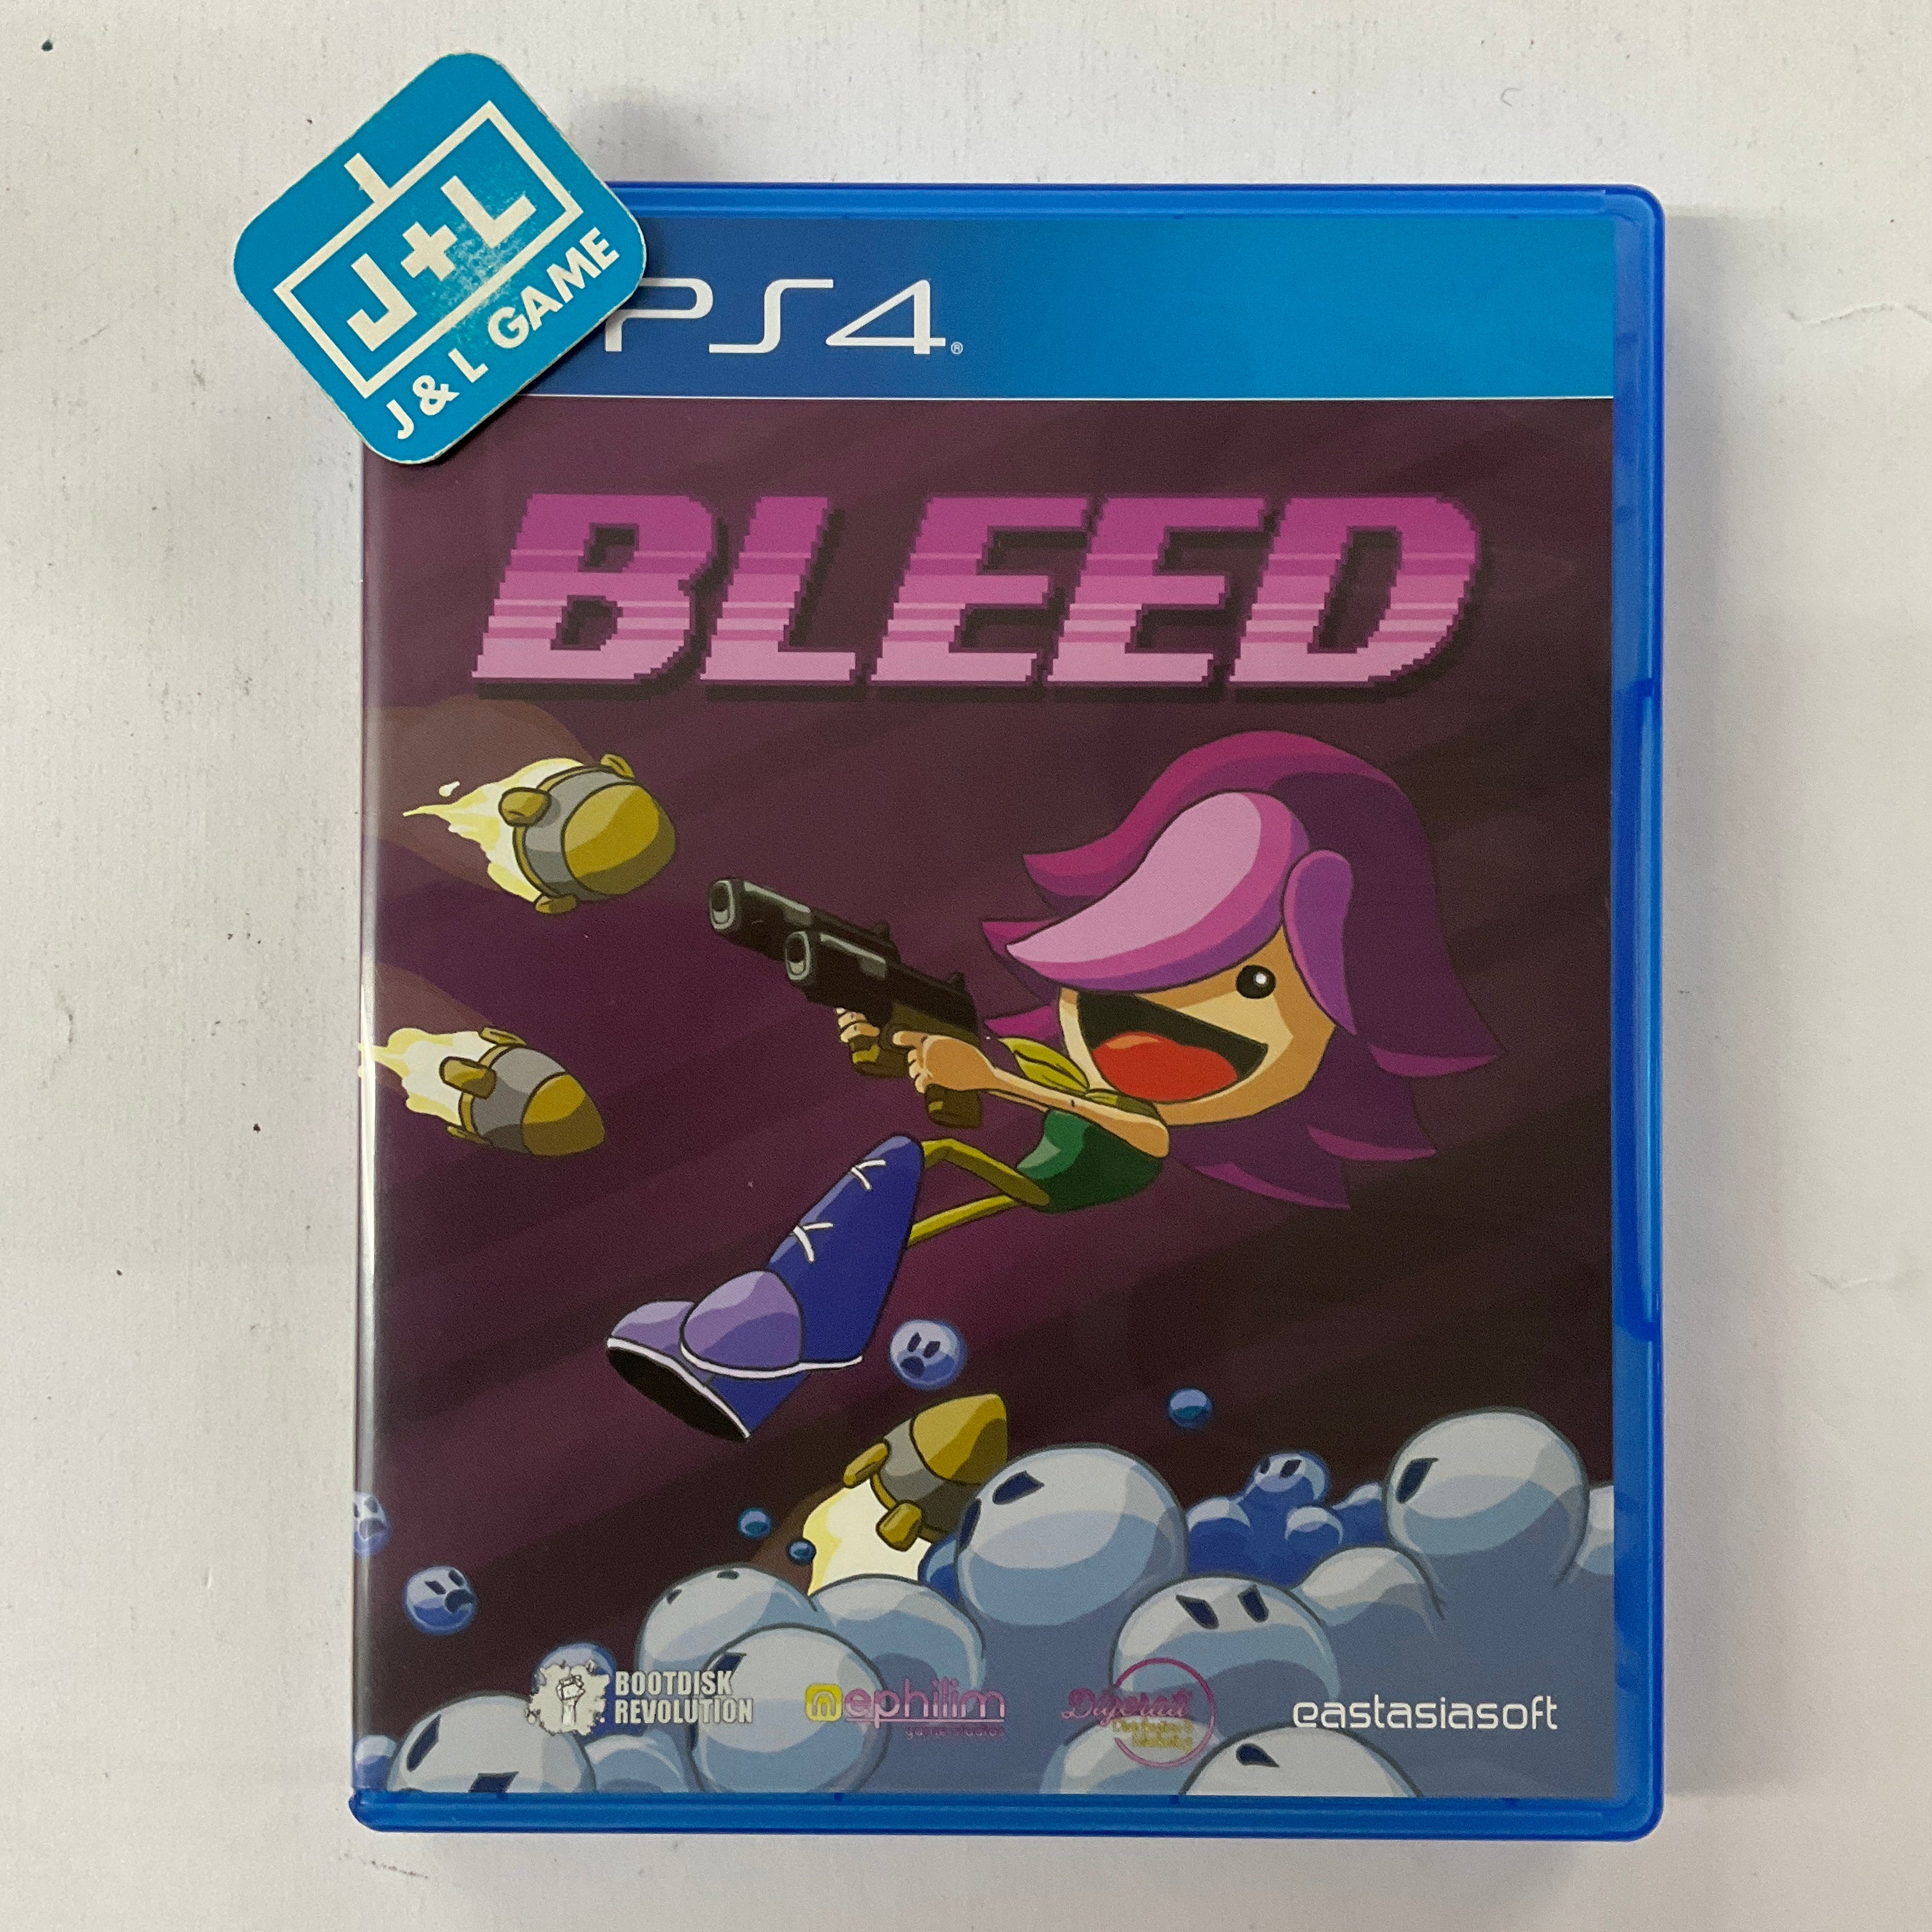 Bleed + Bleed 2 (Limited Edition) - (PS4) PlayStation 4 [Pre-Owned] (Asia Import) Video Games eastasiasoft   